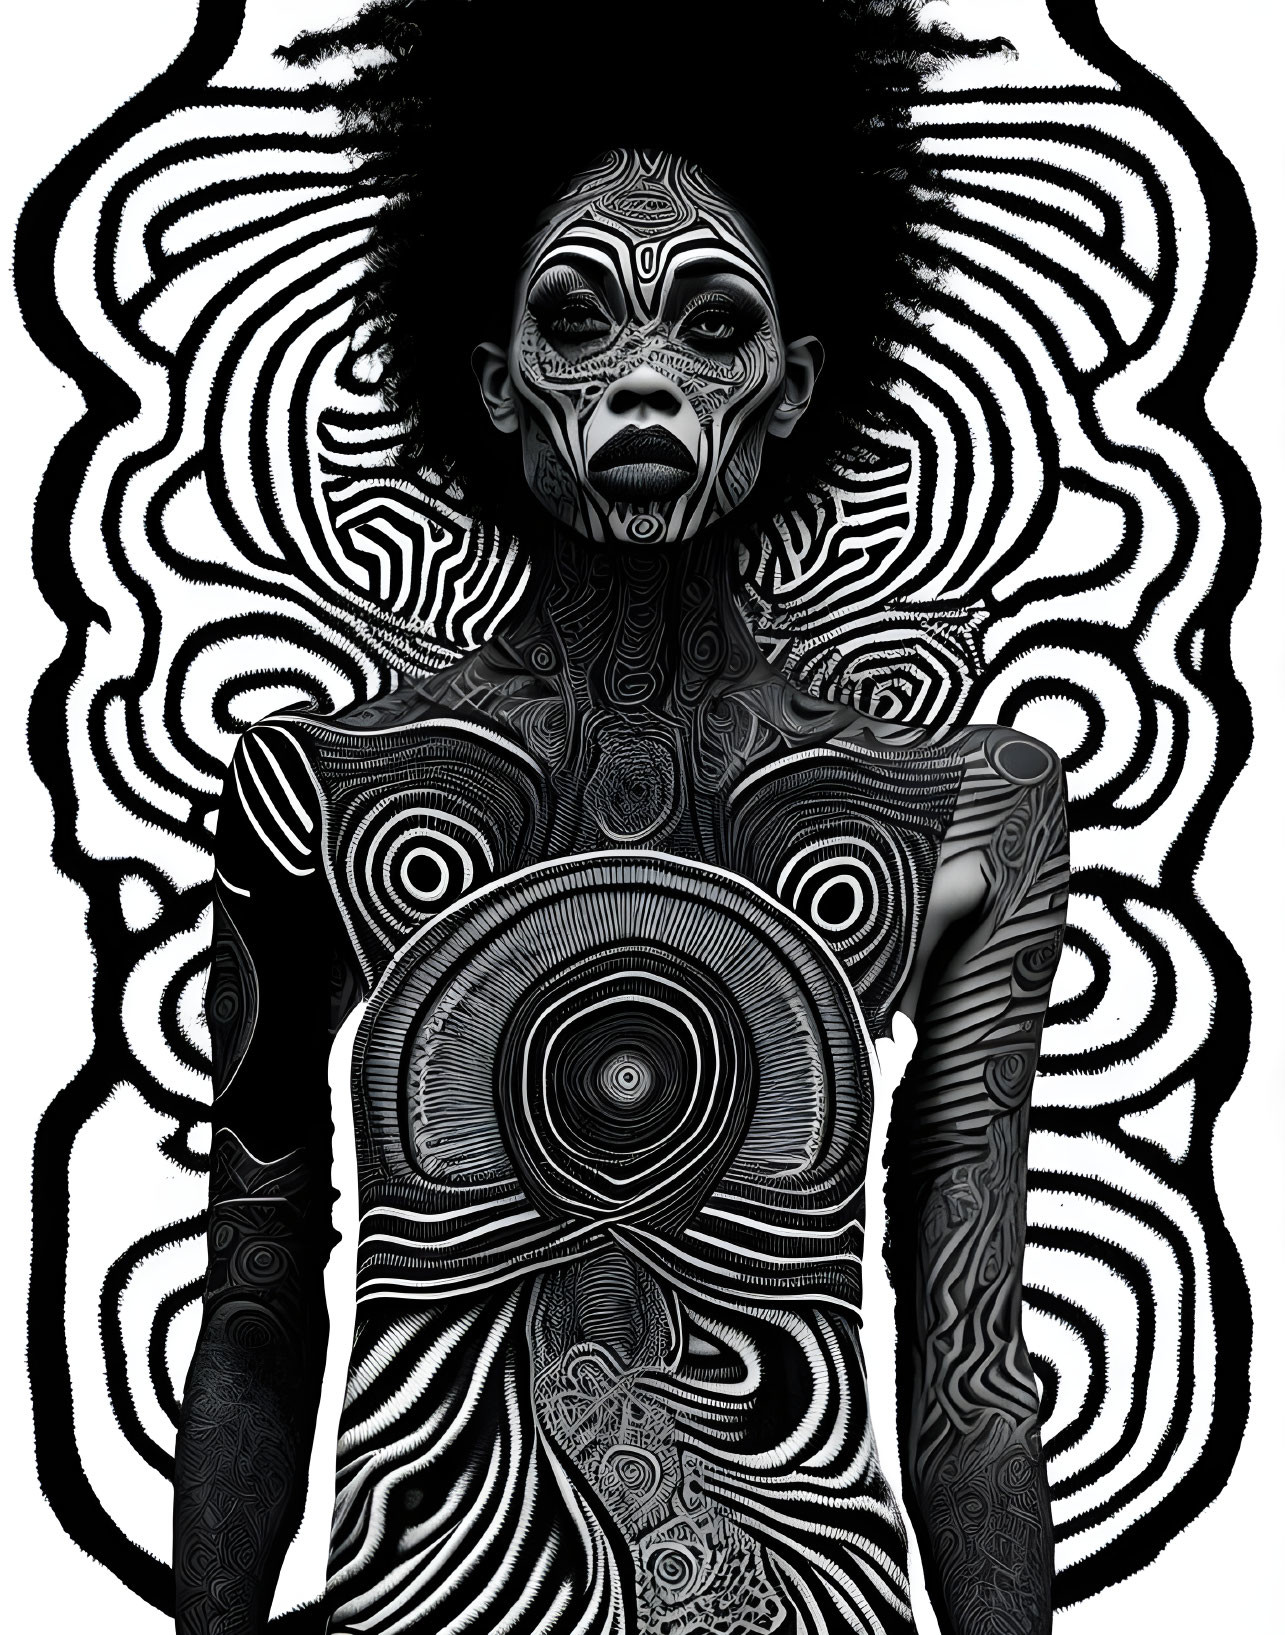 Intricate Black and White Body Paint with Circular and Wavy Patterns